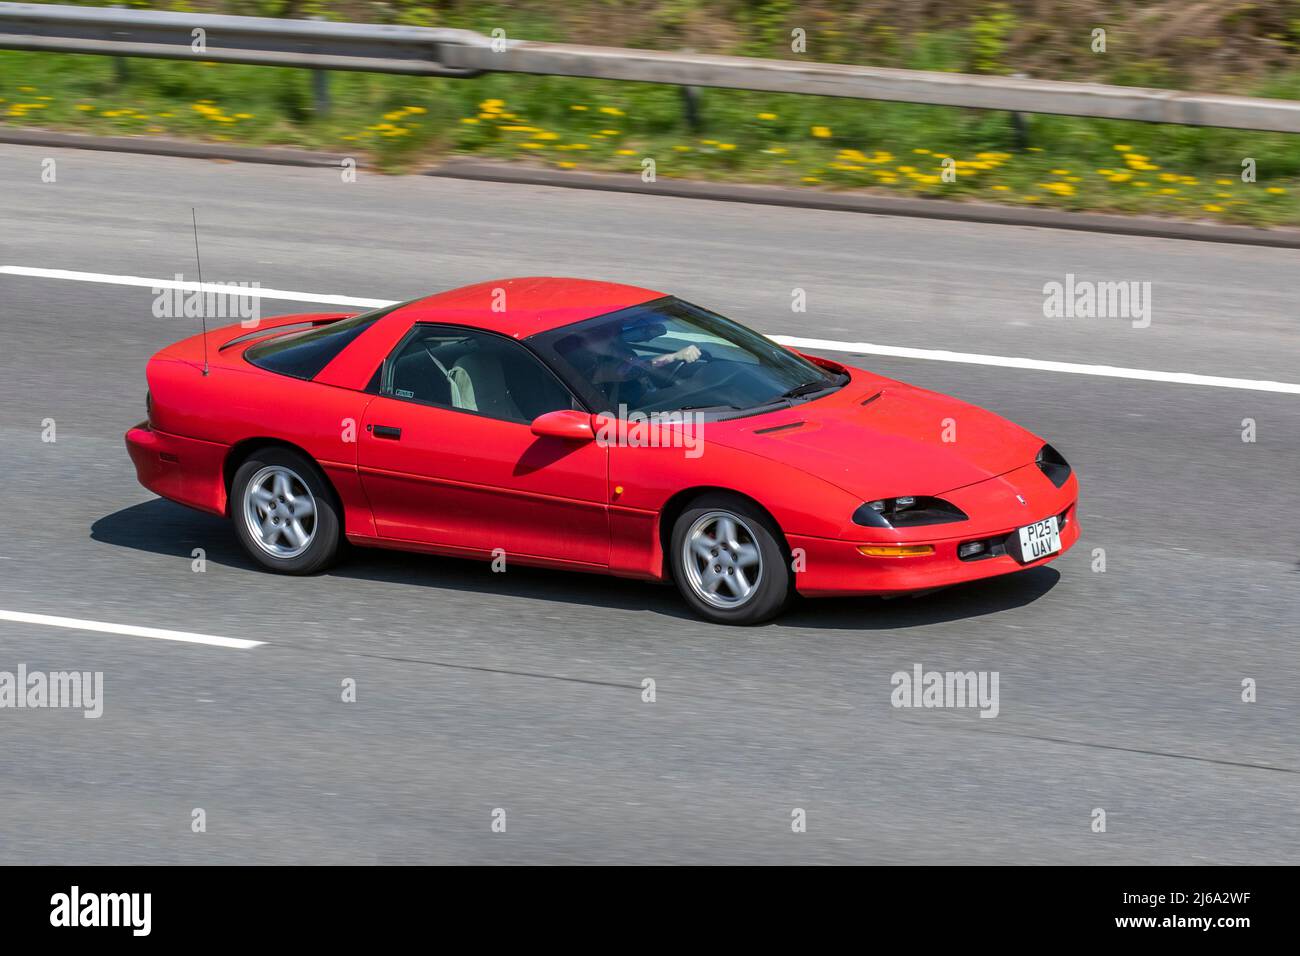 1997 90s nineties red Chevrolet GMC Camaro 3800cc American left-hand drive petrol coupe; driving on the M61 motorway in Manchester, UK Stock Photo